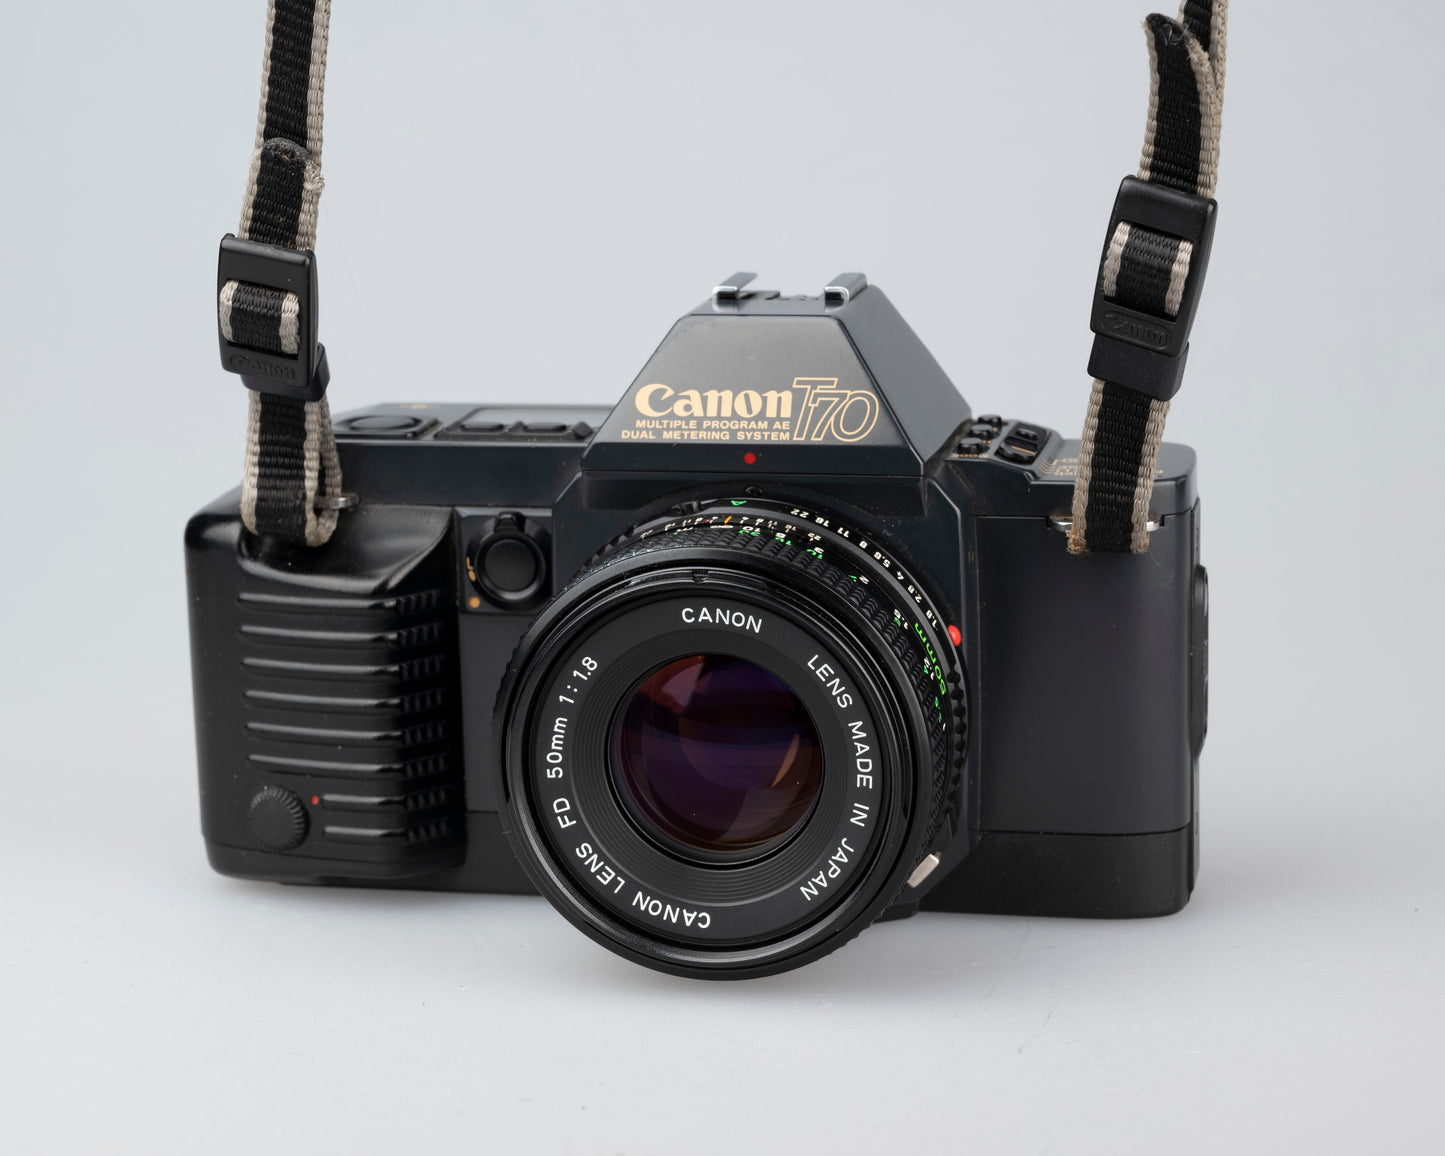 The Canon T70 35mm SLR camera  with FD 50mm f1.8 lens. This film-tested camera is available at www.newwavepool.shop 